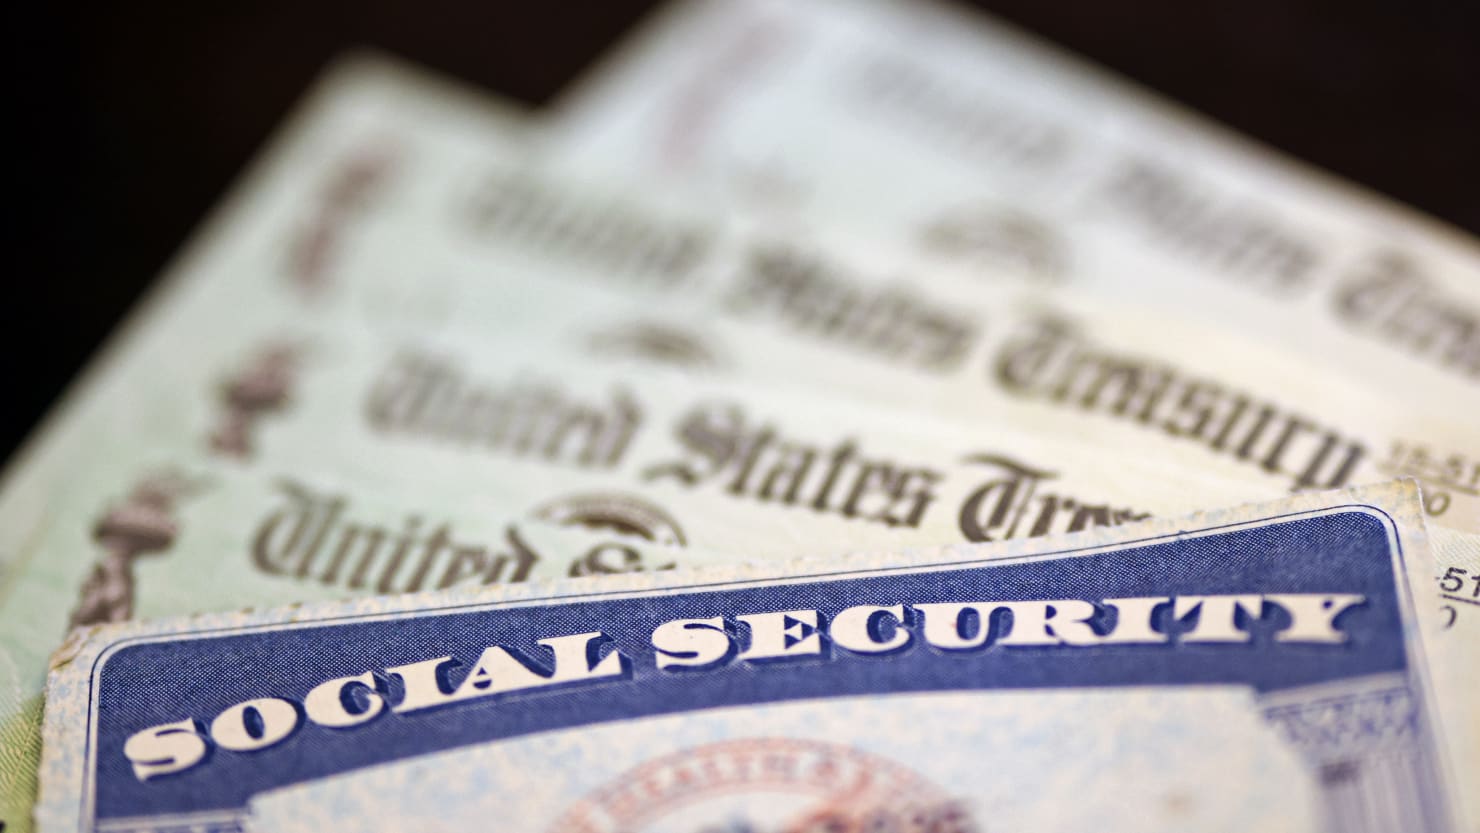 Social Security Recipients to Get Their Biggest Cash Boost in Decades